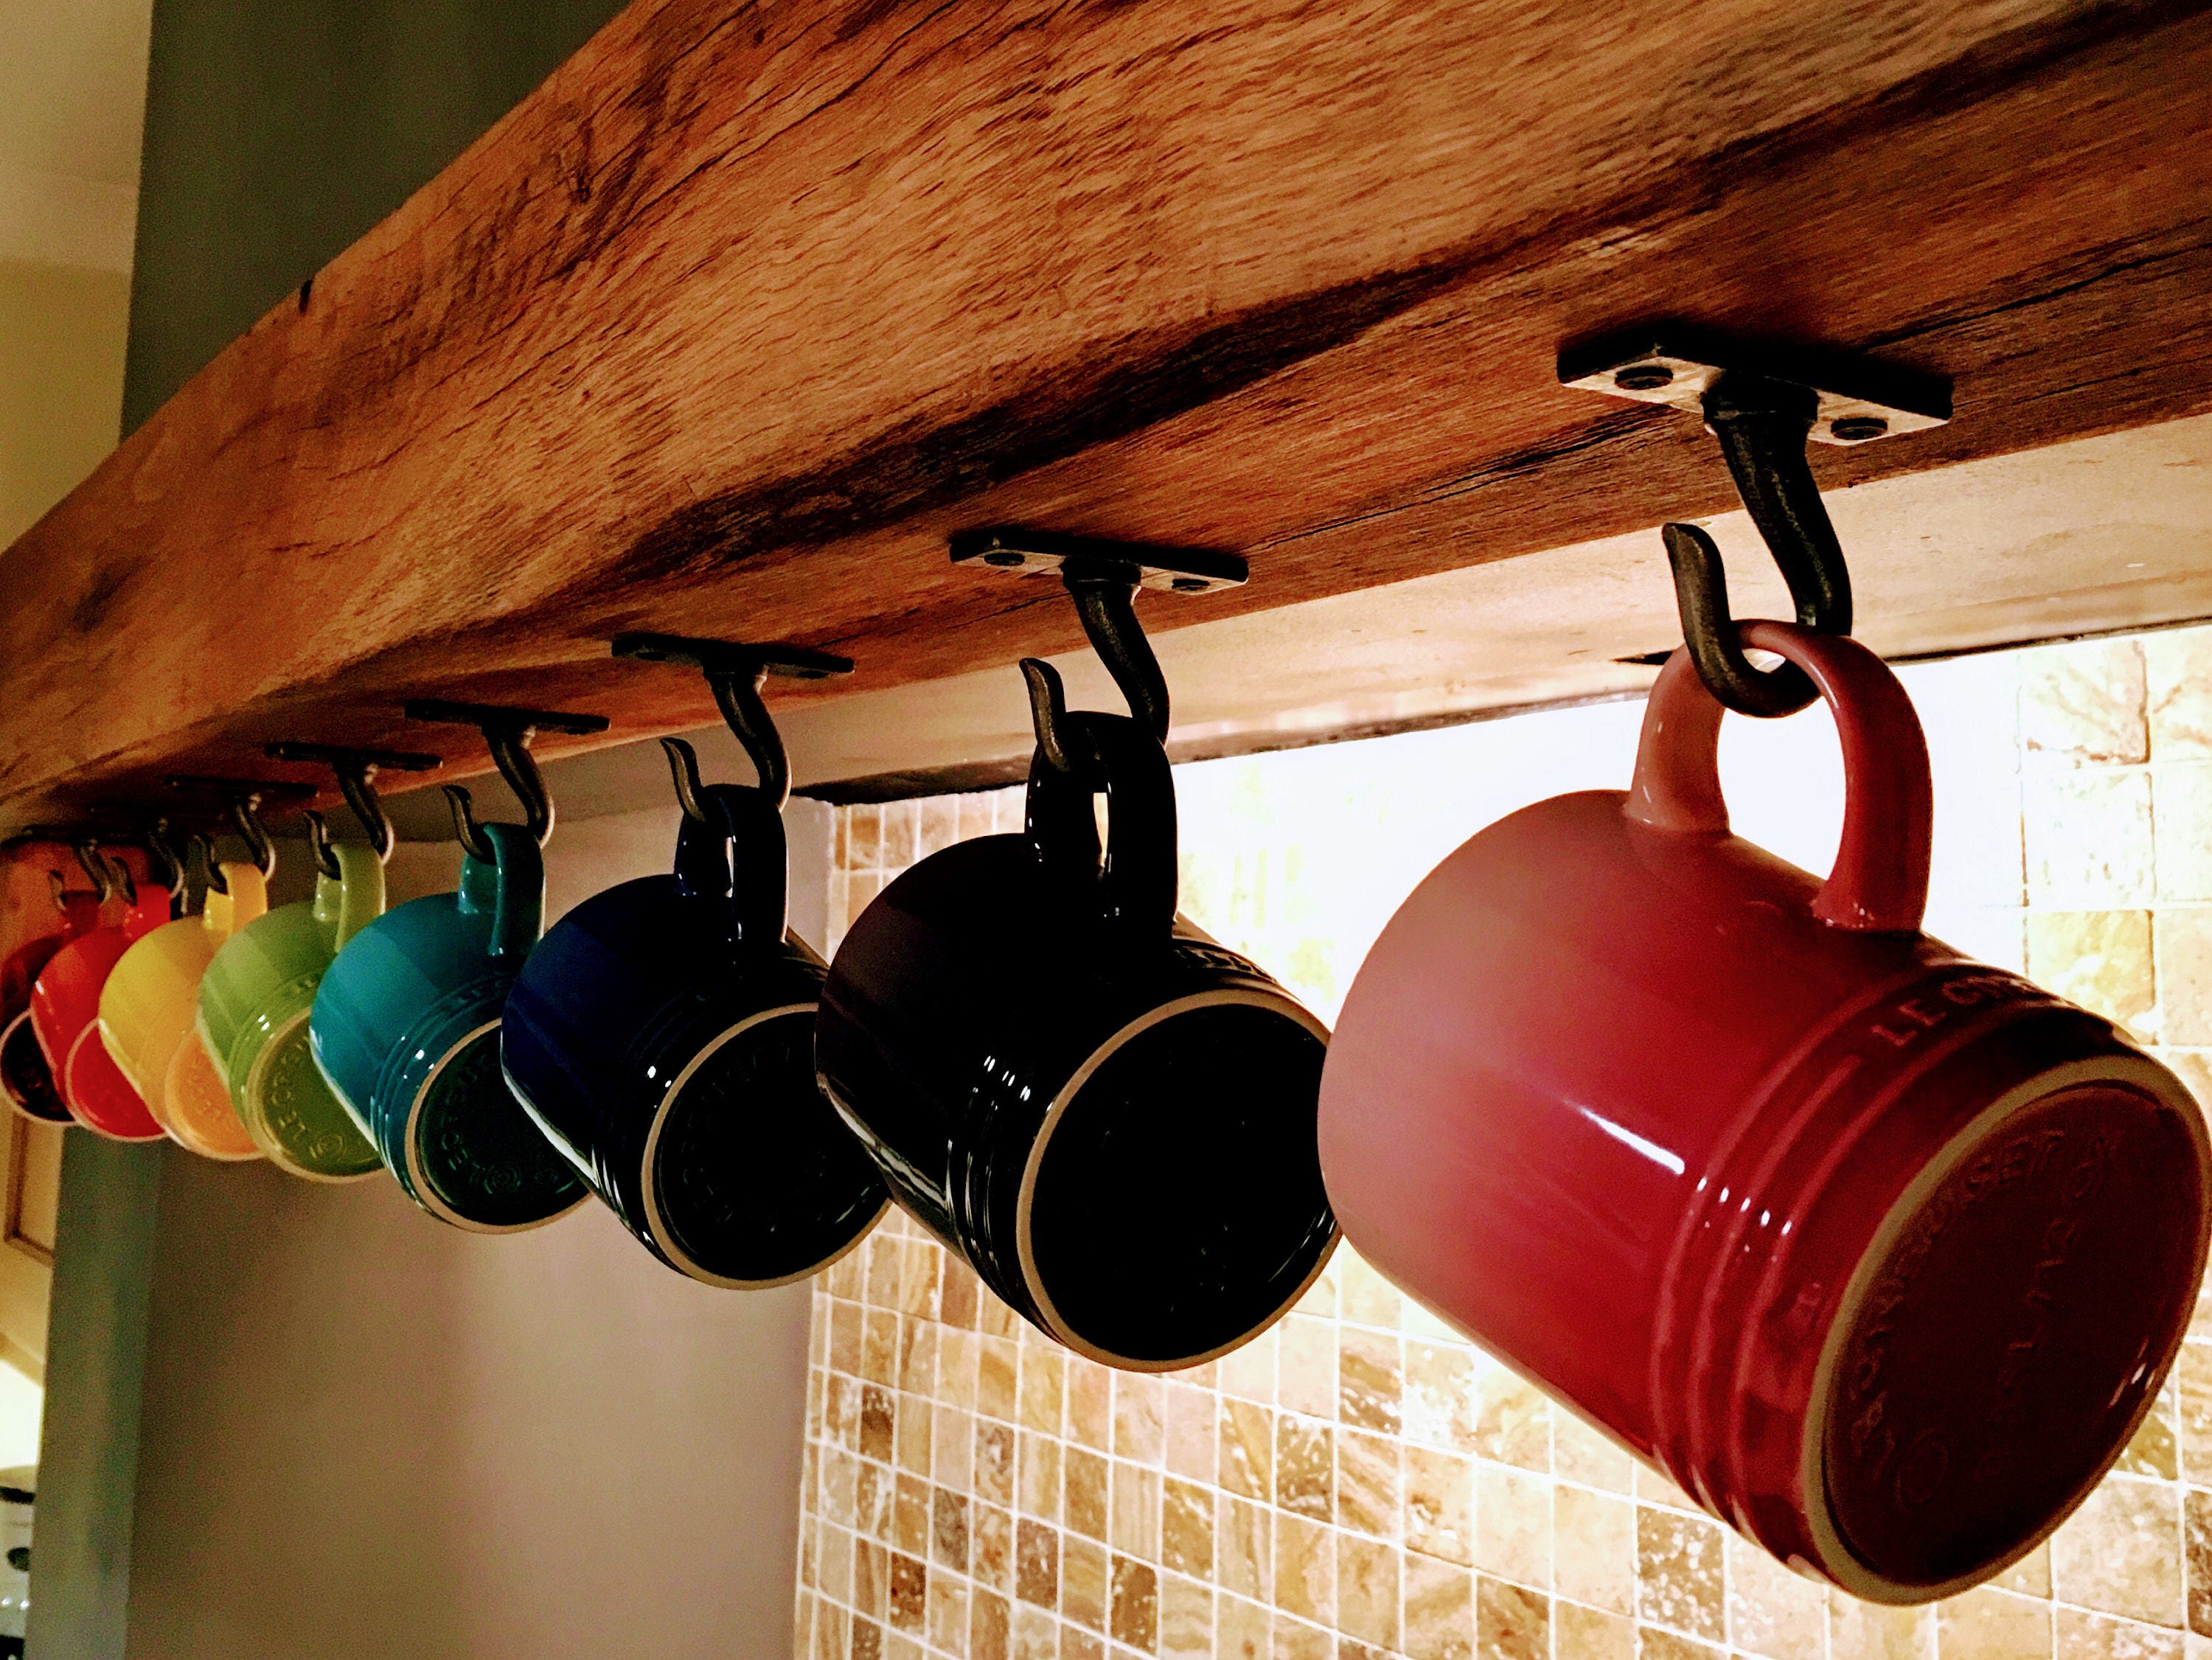 simpletome Mug Hooks Under Cabinet, Coffee Cup Organizer, Ceiling